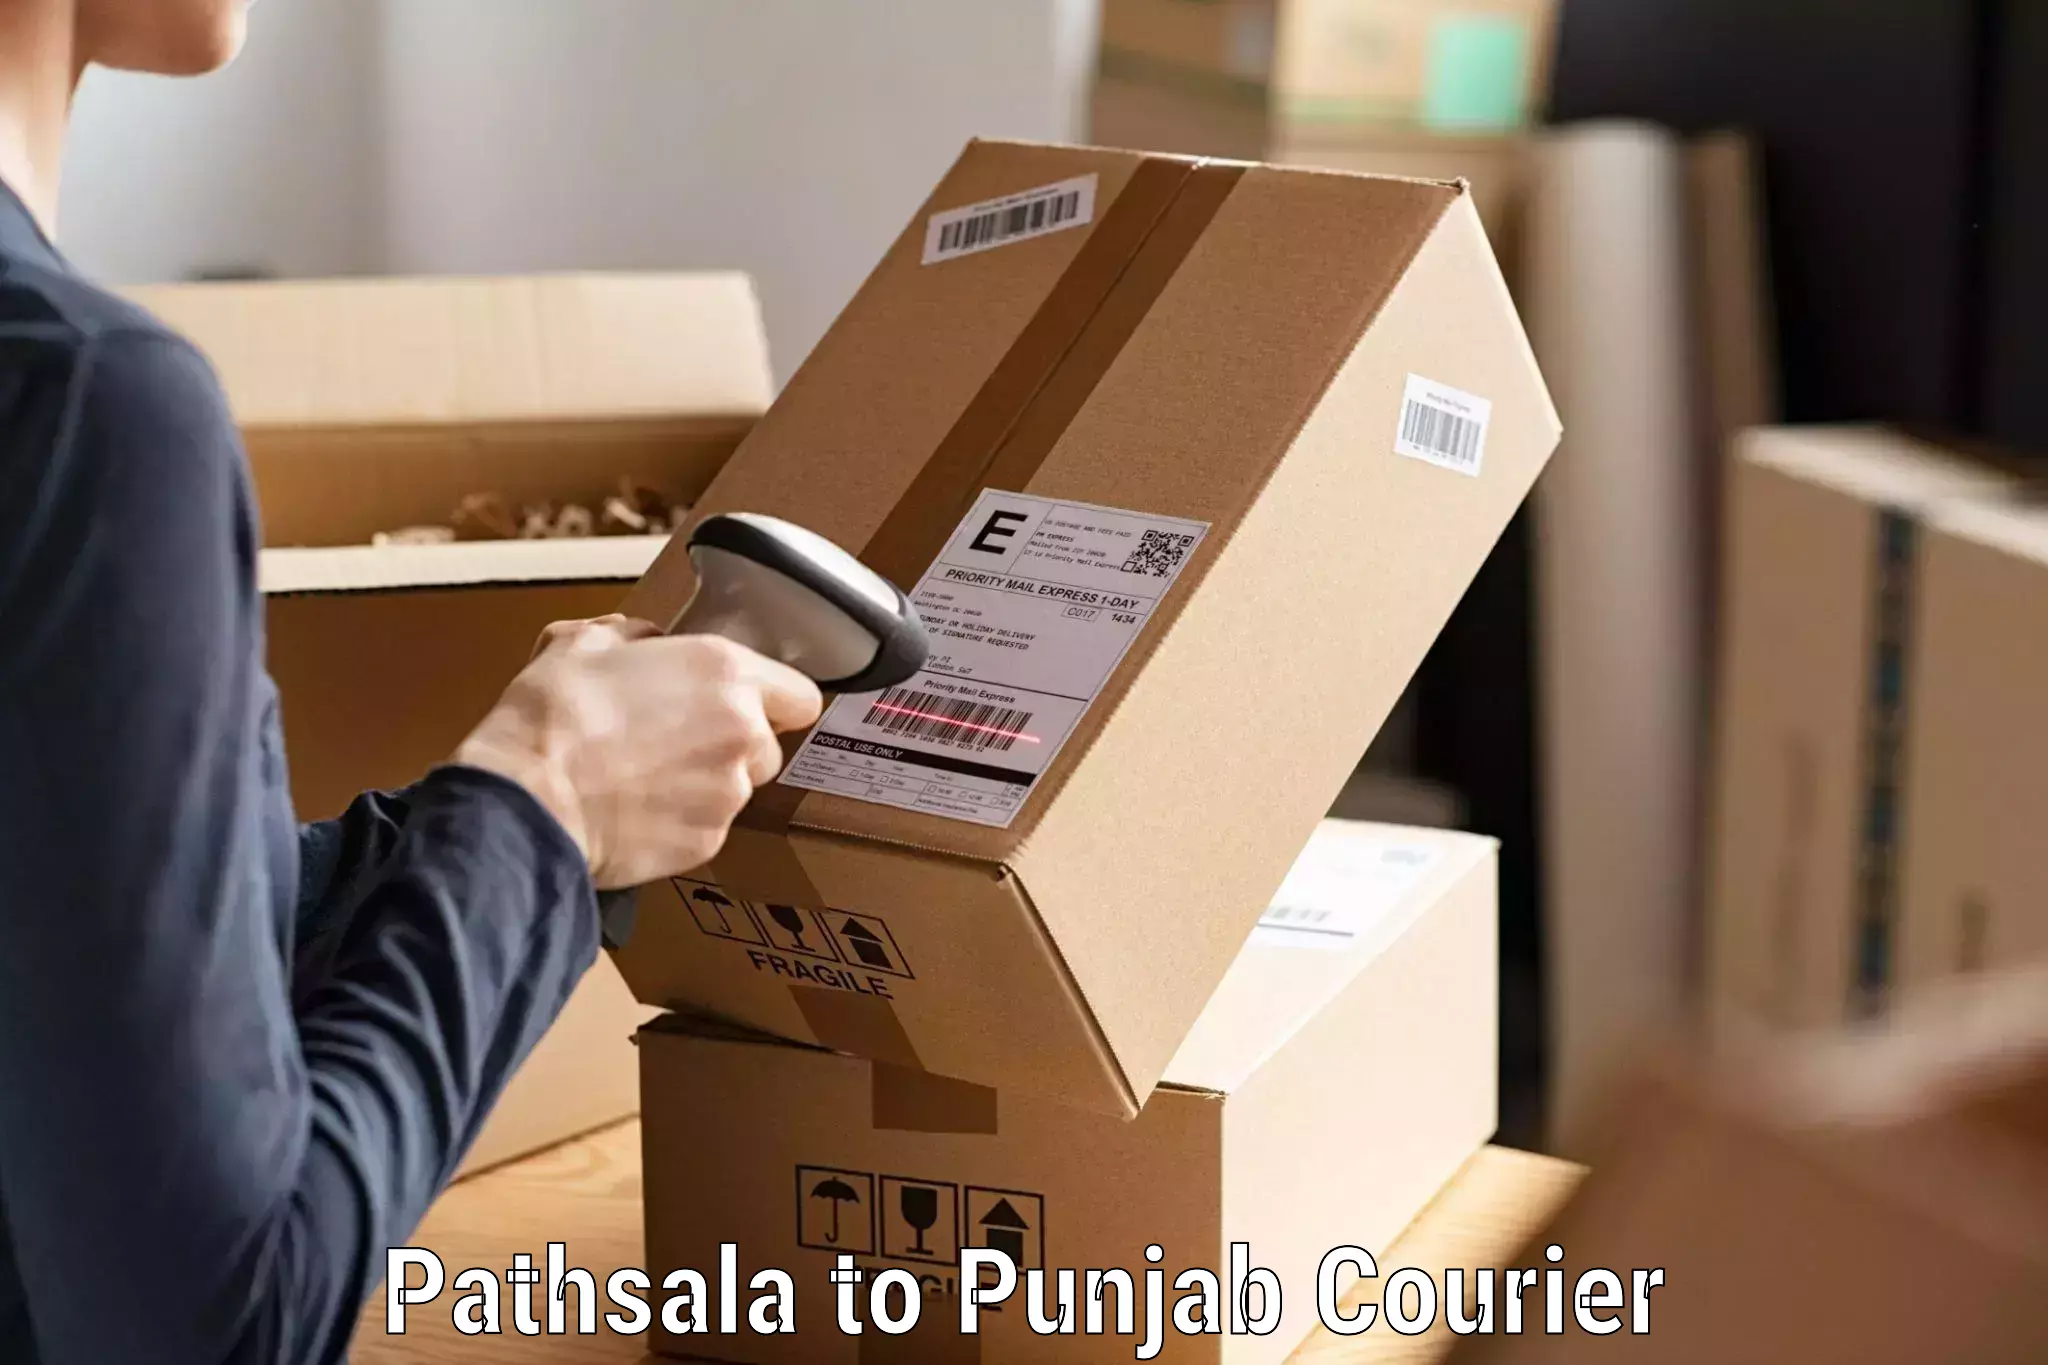 On-call courier service Pathsala to Ajnala